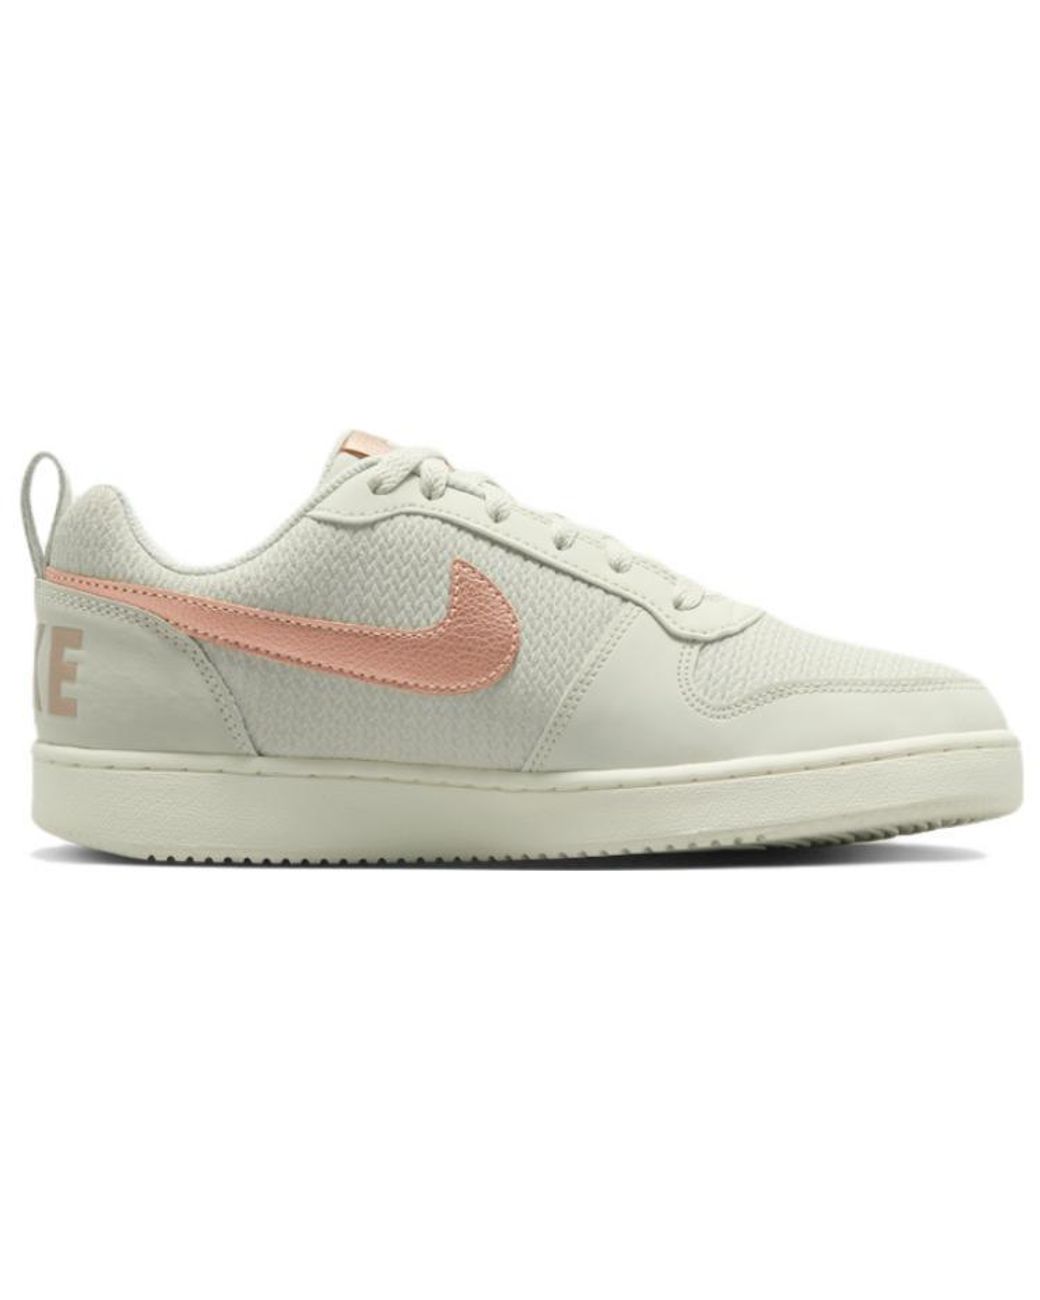 Nike Court Borough Low Prm in White | Lyst